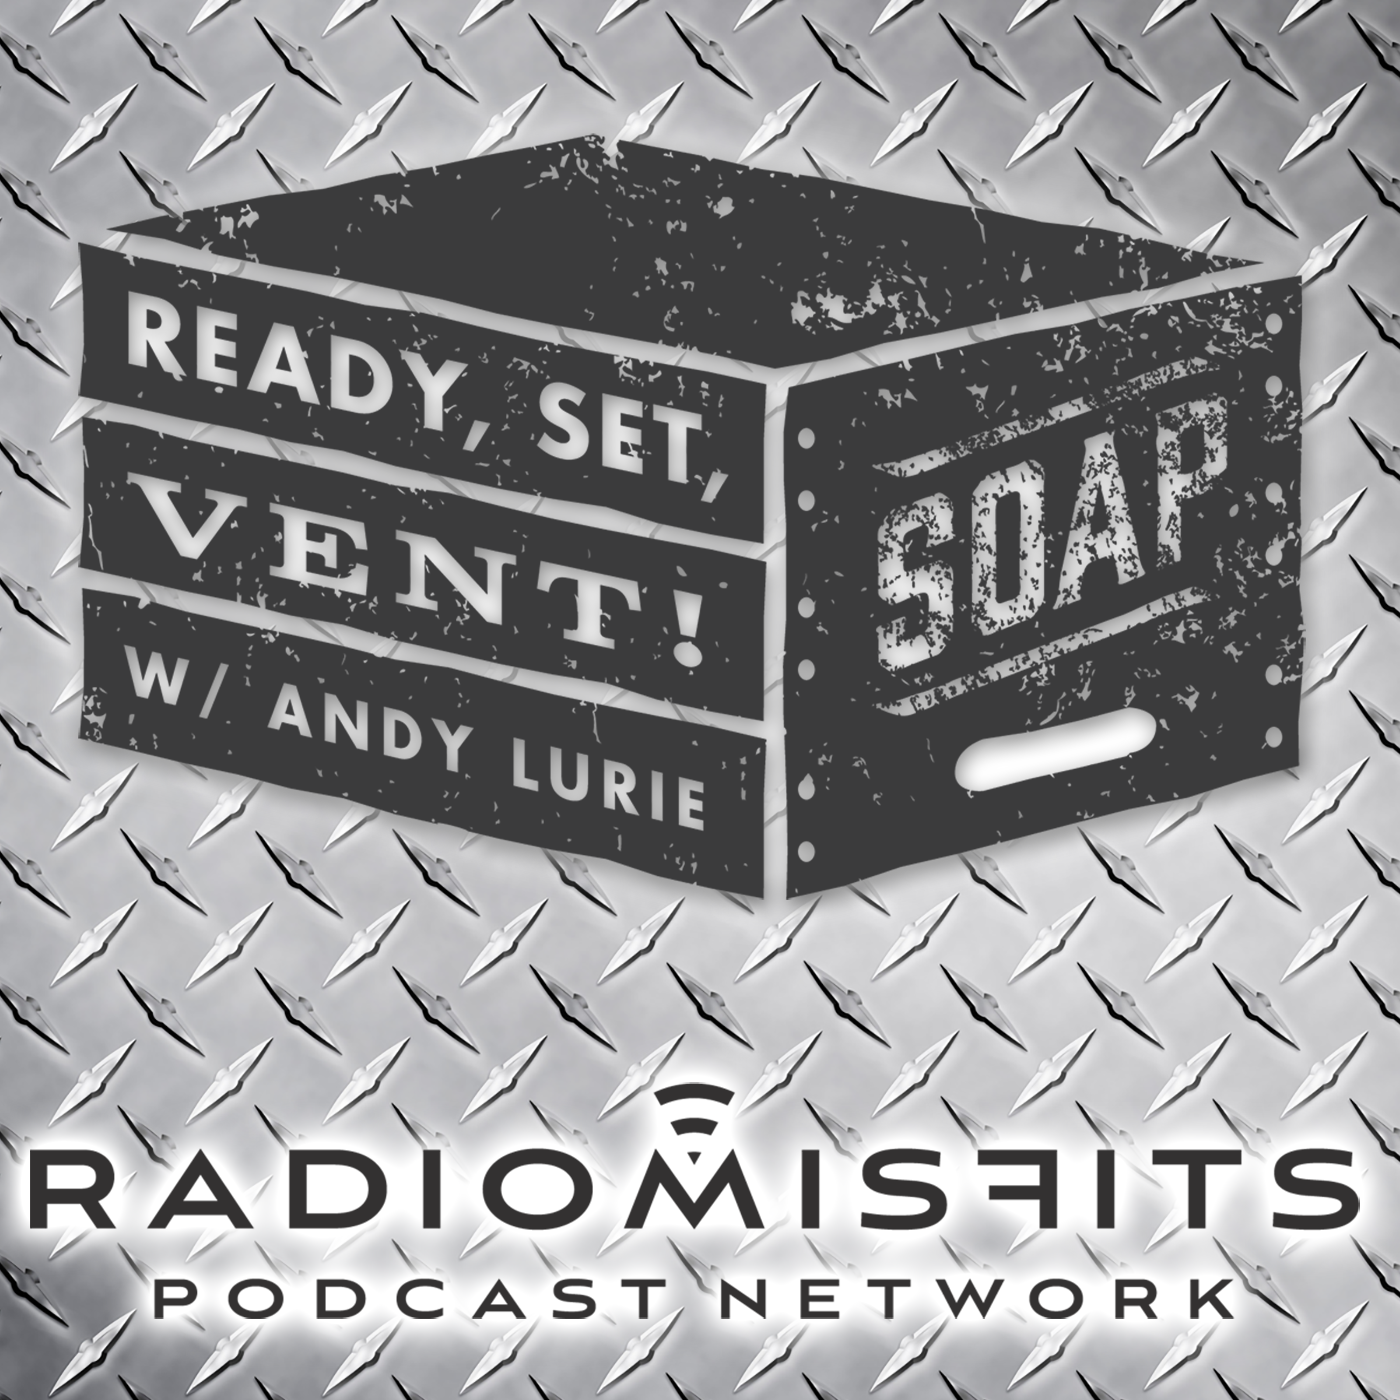 Ready, Set, Vent! w/ Andy Lurie on the Radio Misfits Podcast Network